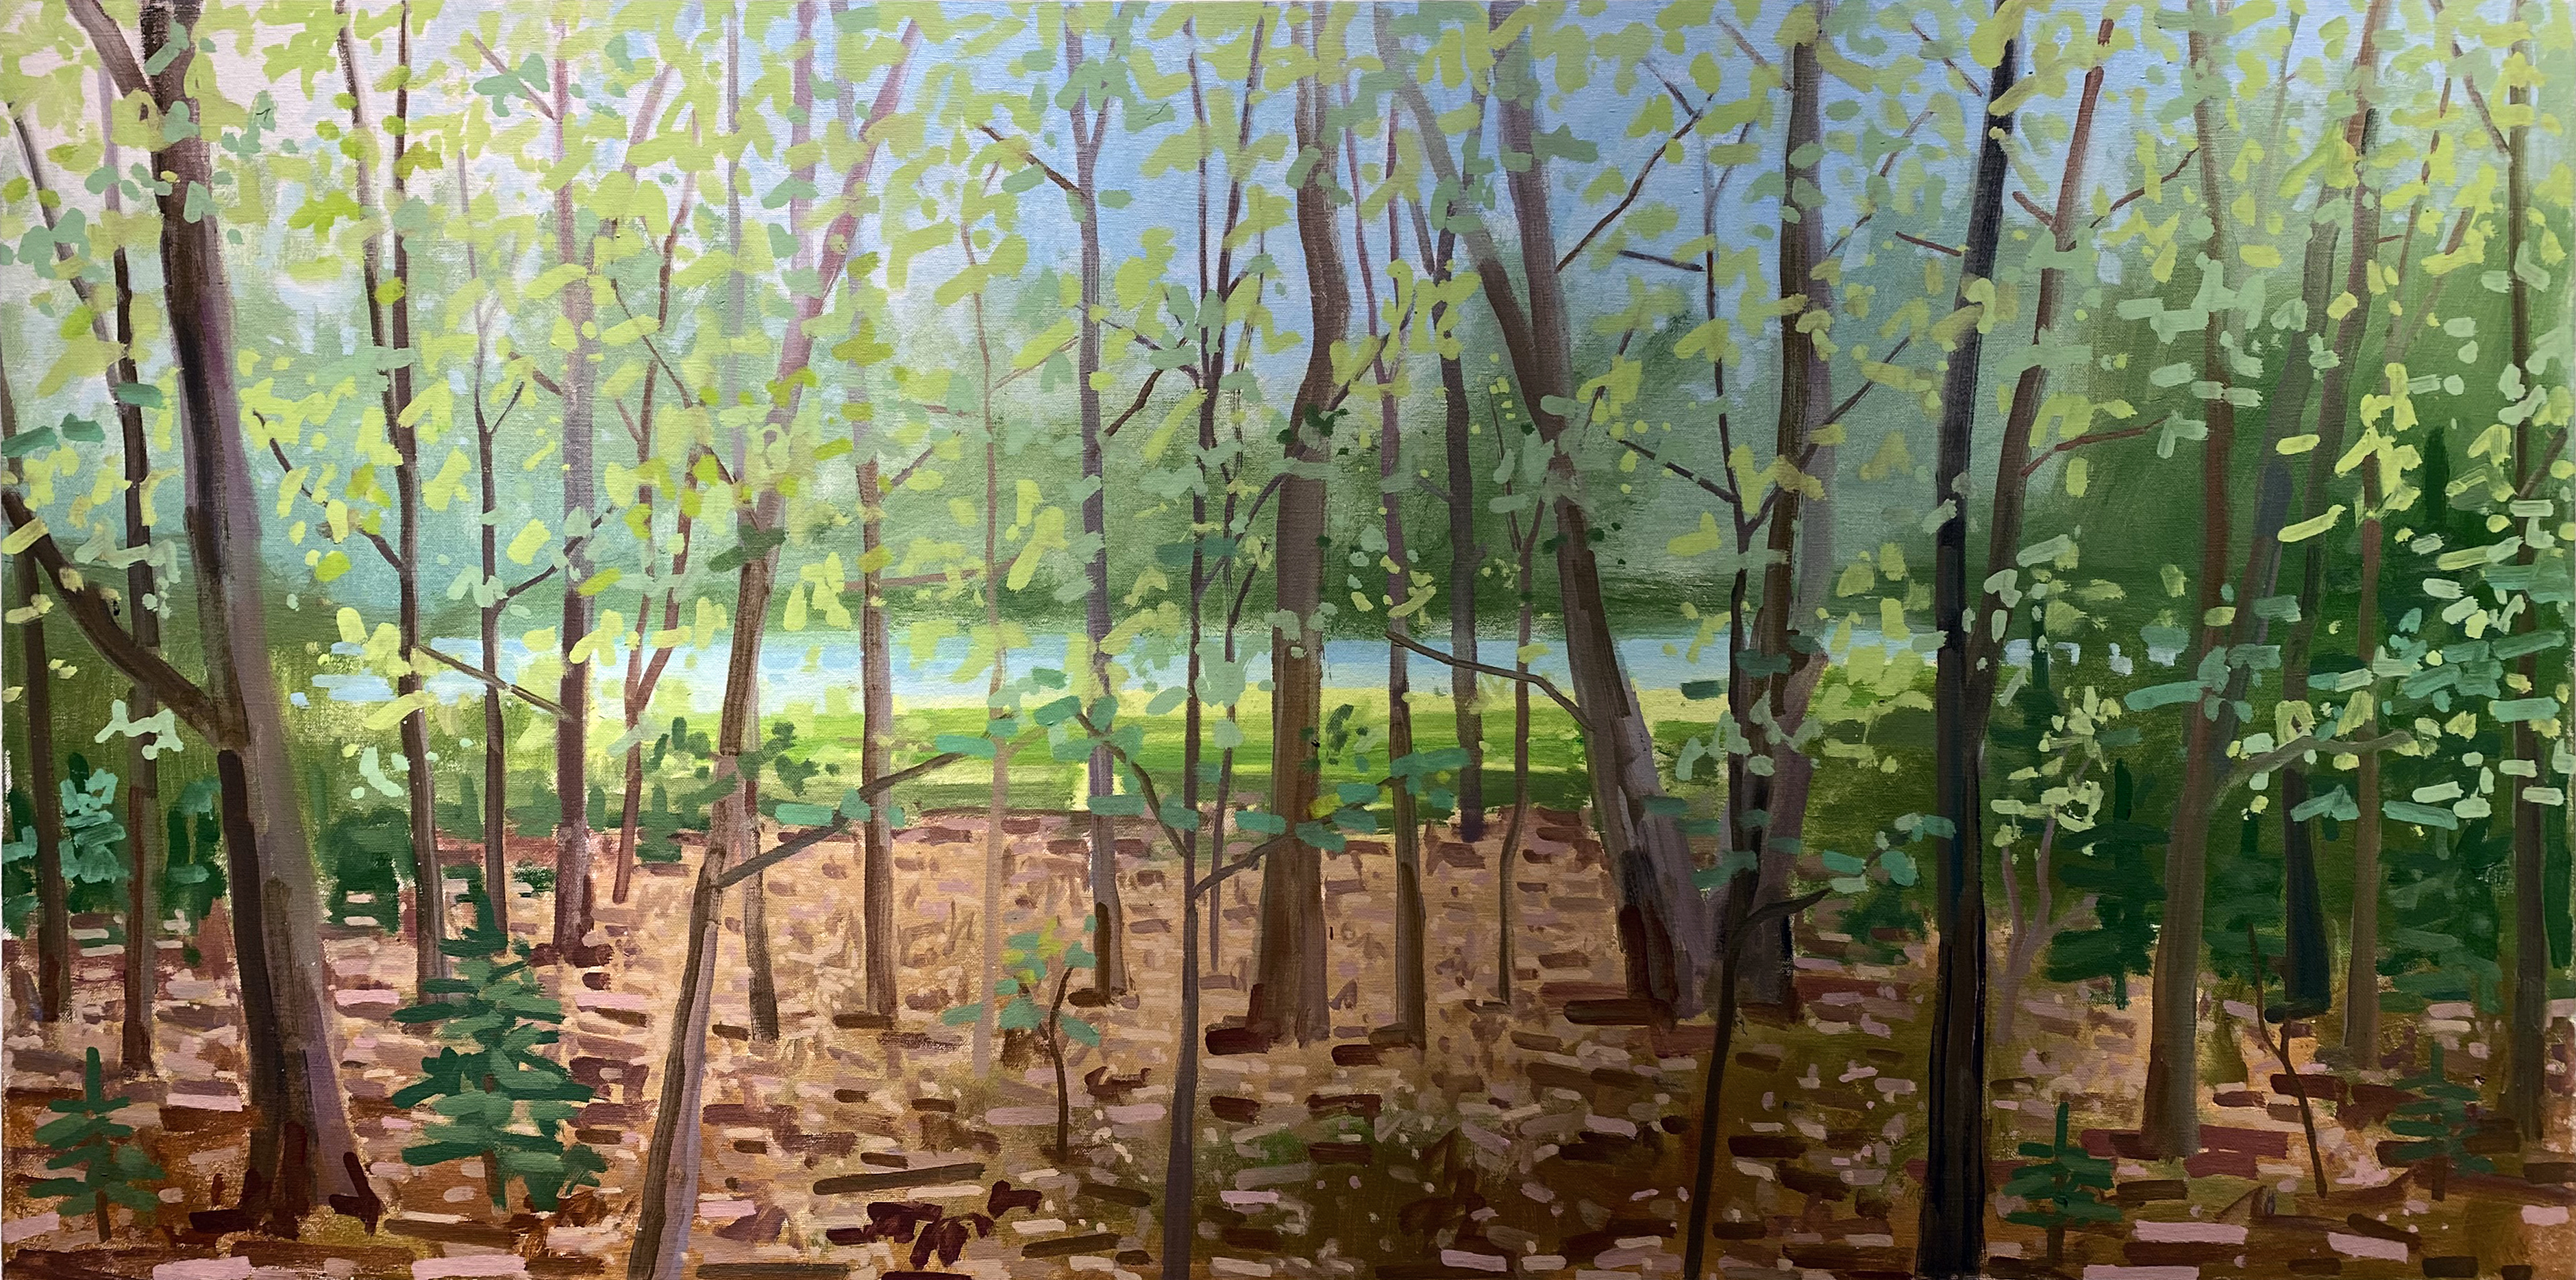 SLIVER OF WATER, oil on canvas, 24 x 48 inches